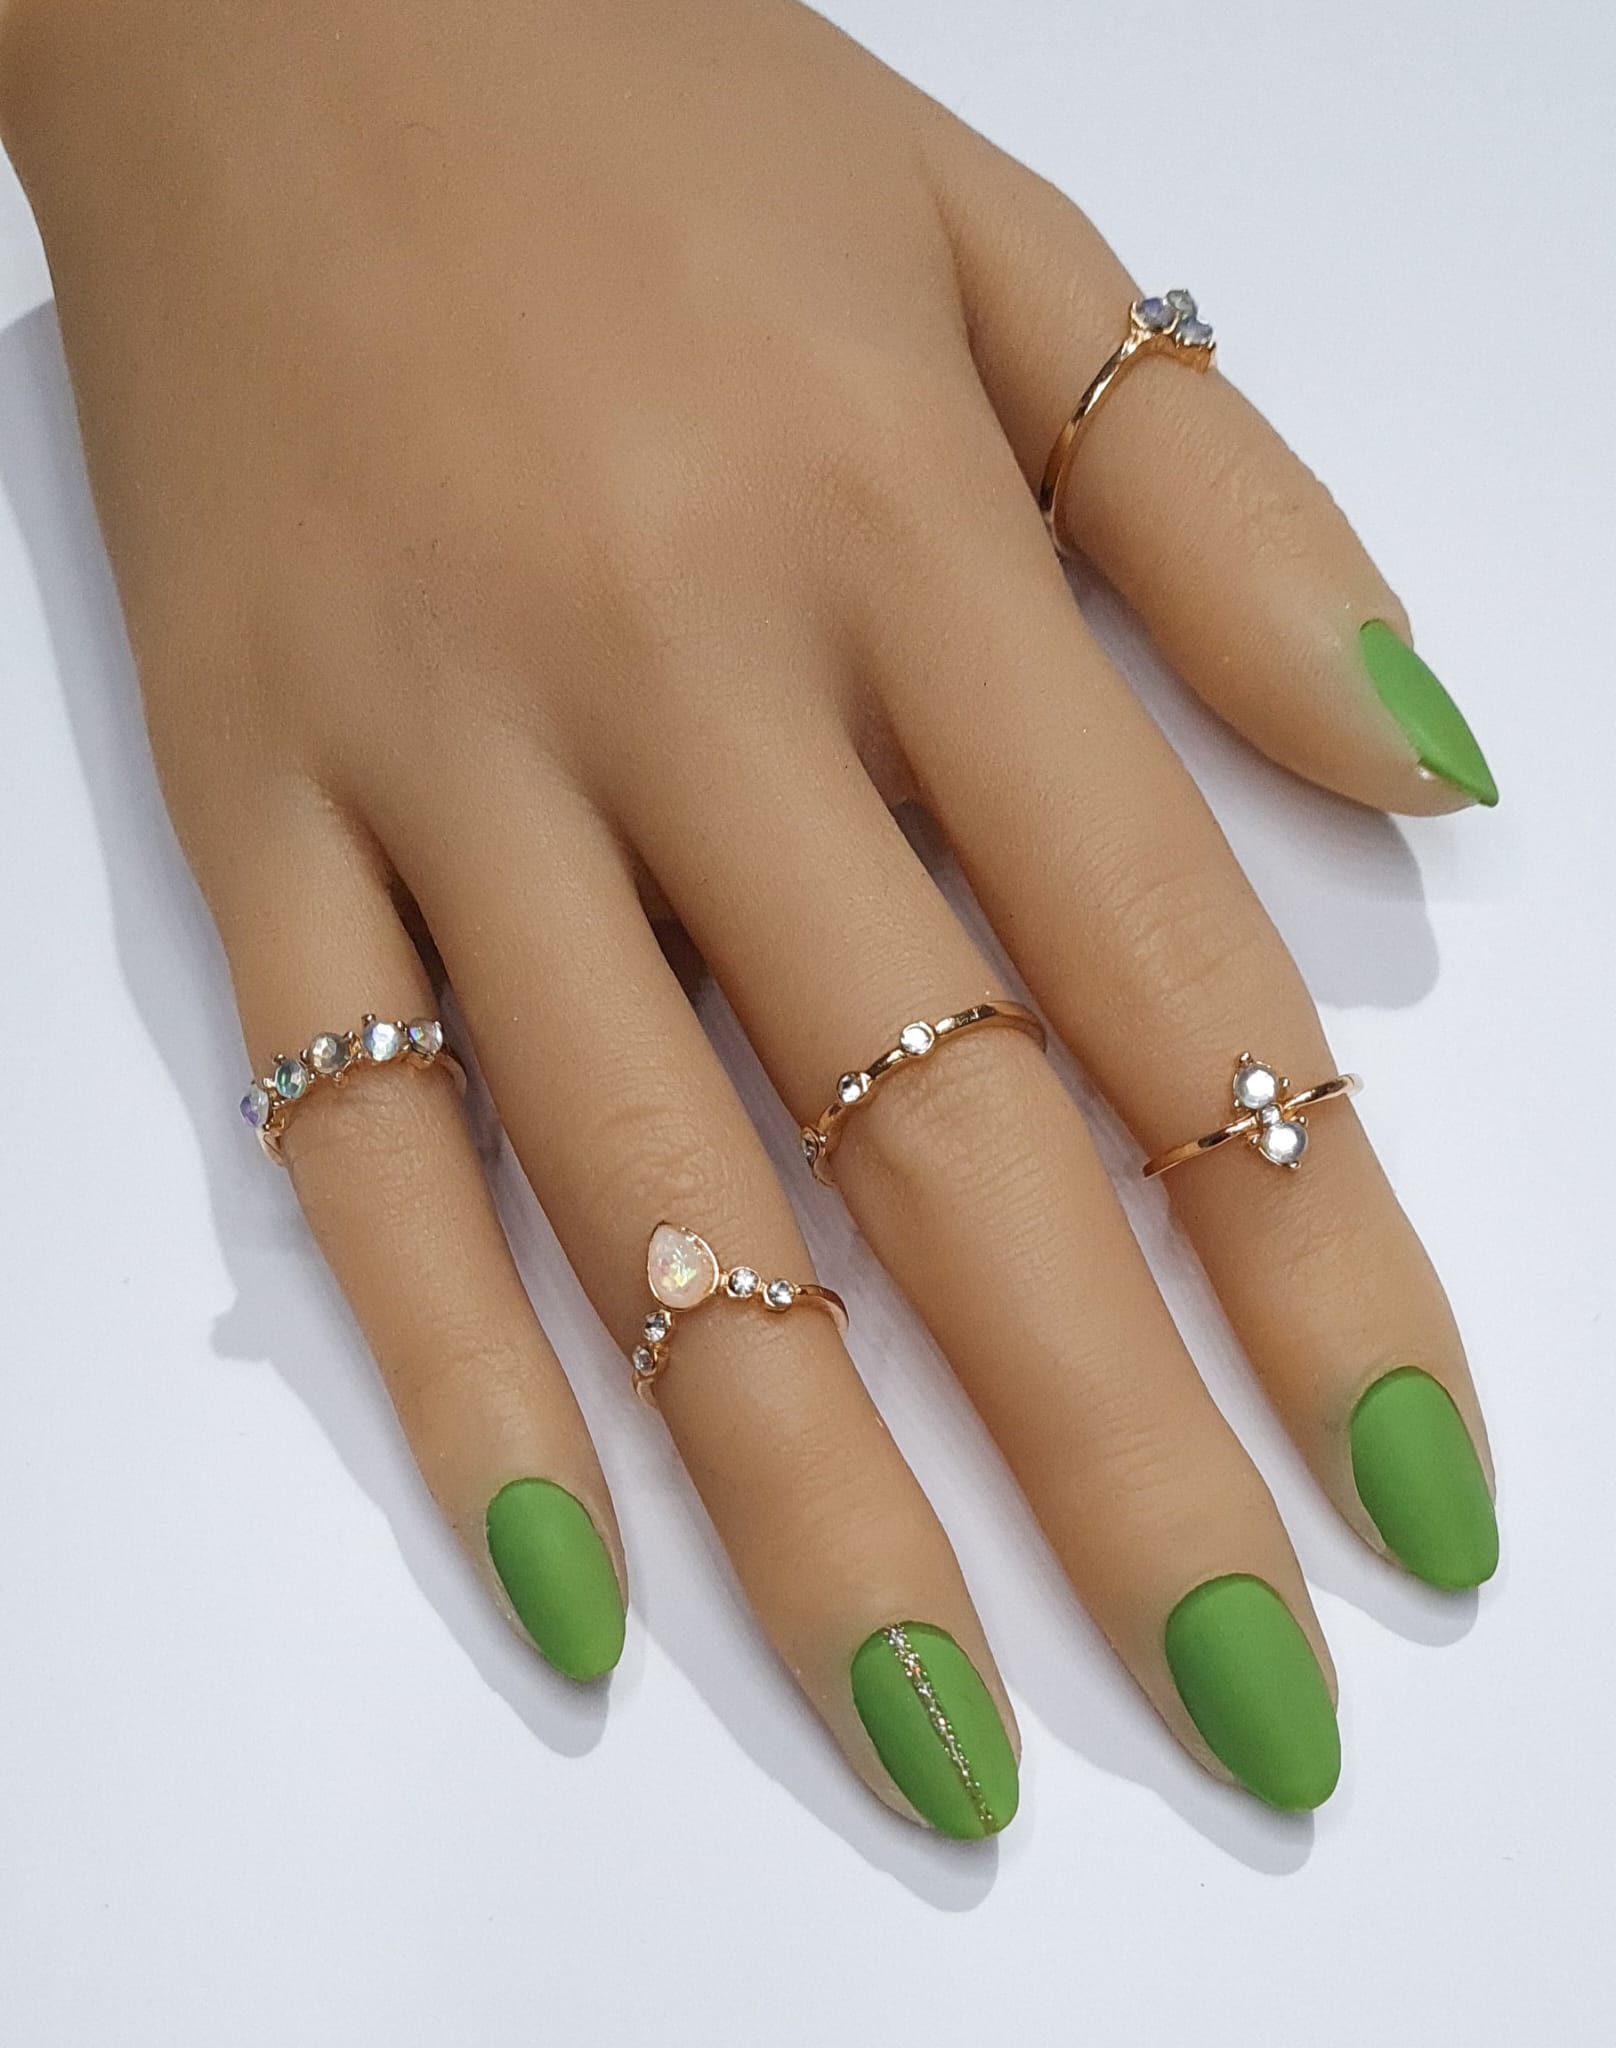 Press On Nails- Extra Short Almond Shaped Basic Grass Green Spring Summer Collection plain gold accent full cover gel tip luxury false nails salon quality hand painted custom made uk